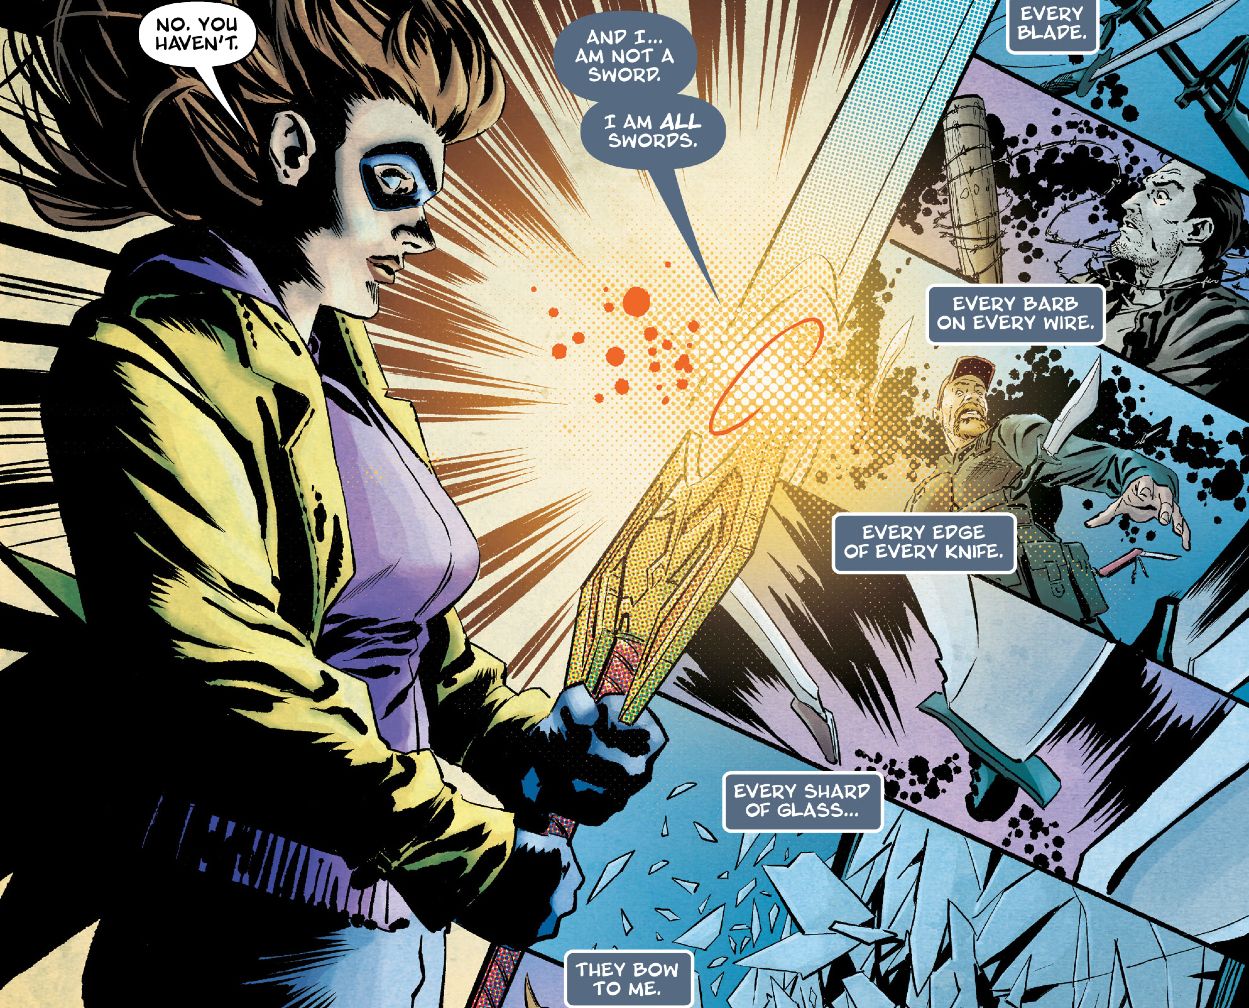 Valofax in Ellie's hand in Crossover #13 